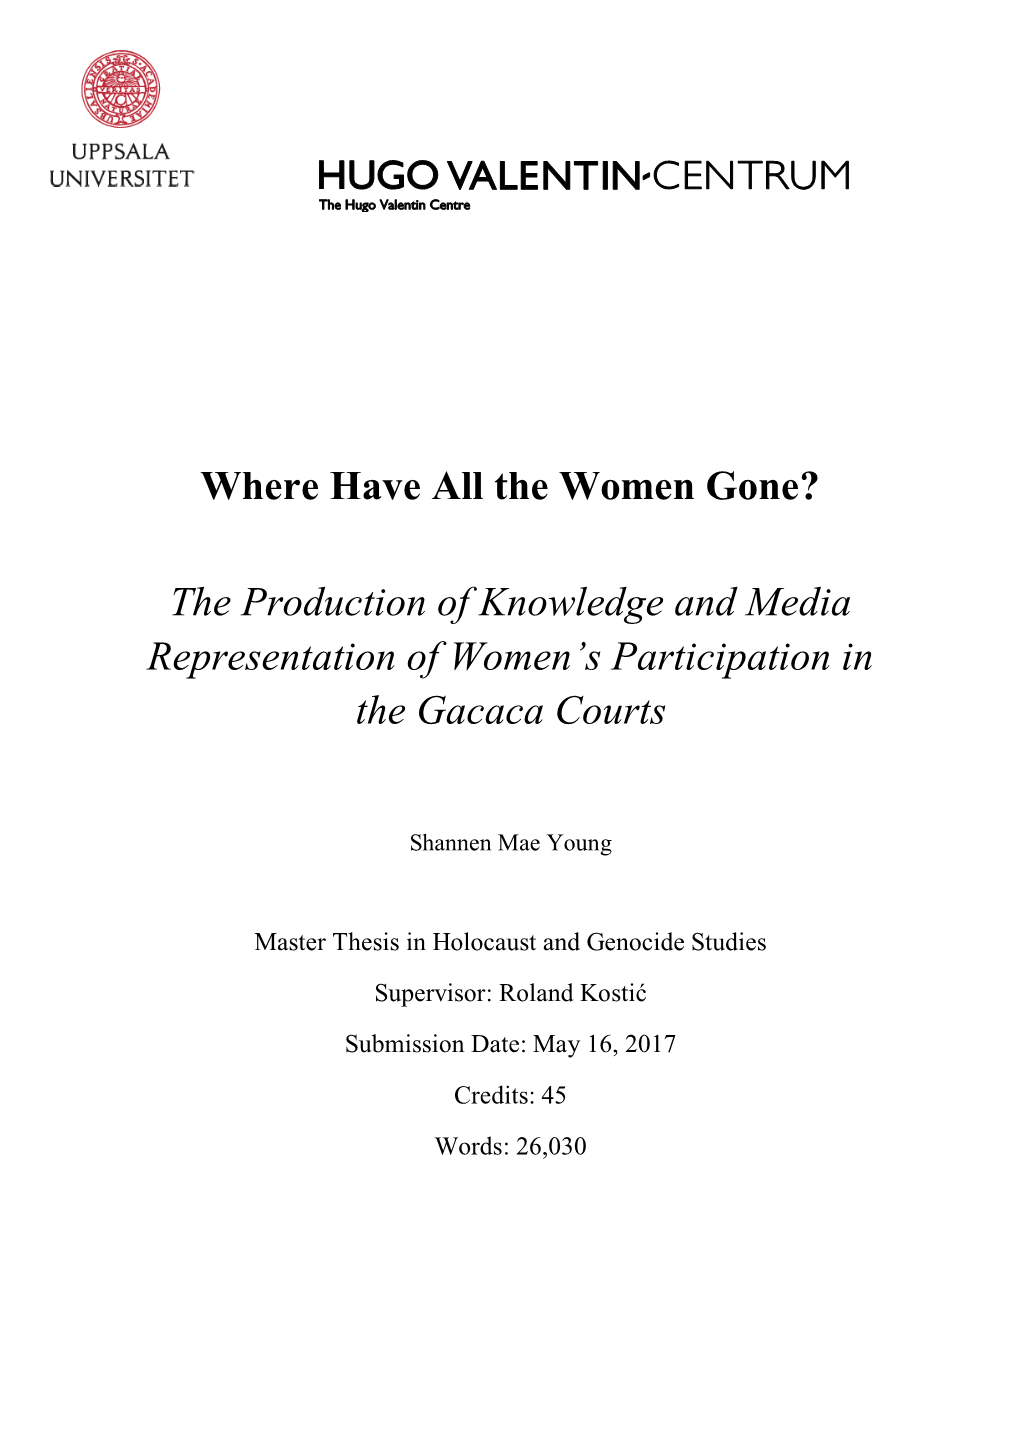 The Production of Knowledge and Media Representation of Women's Participation in the Gacaca